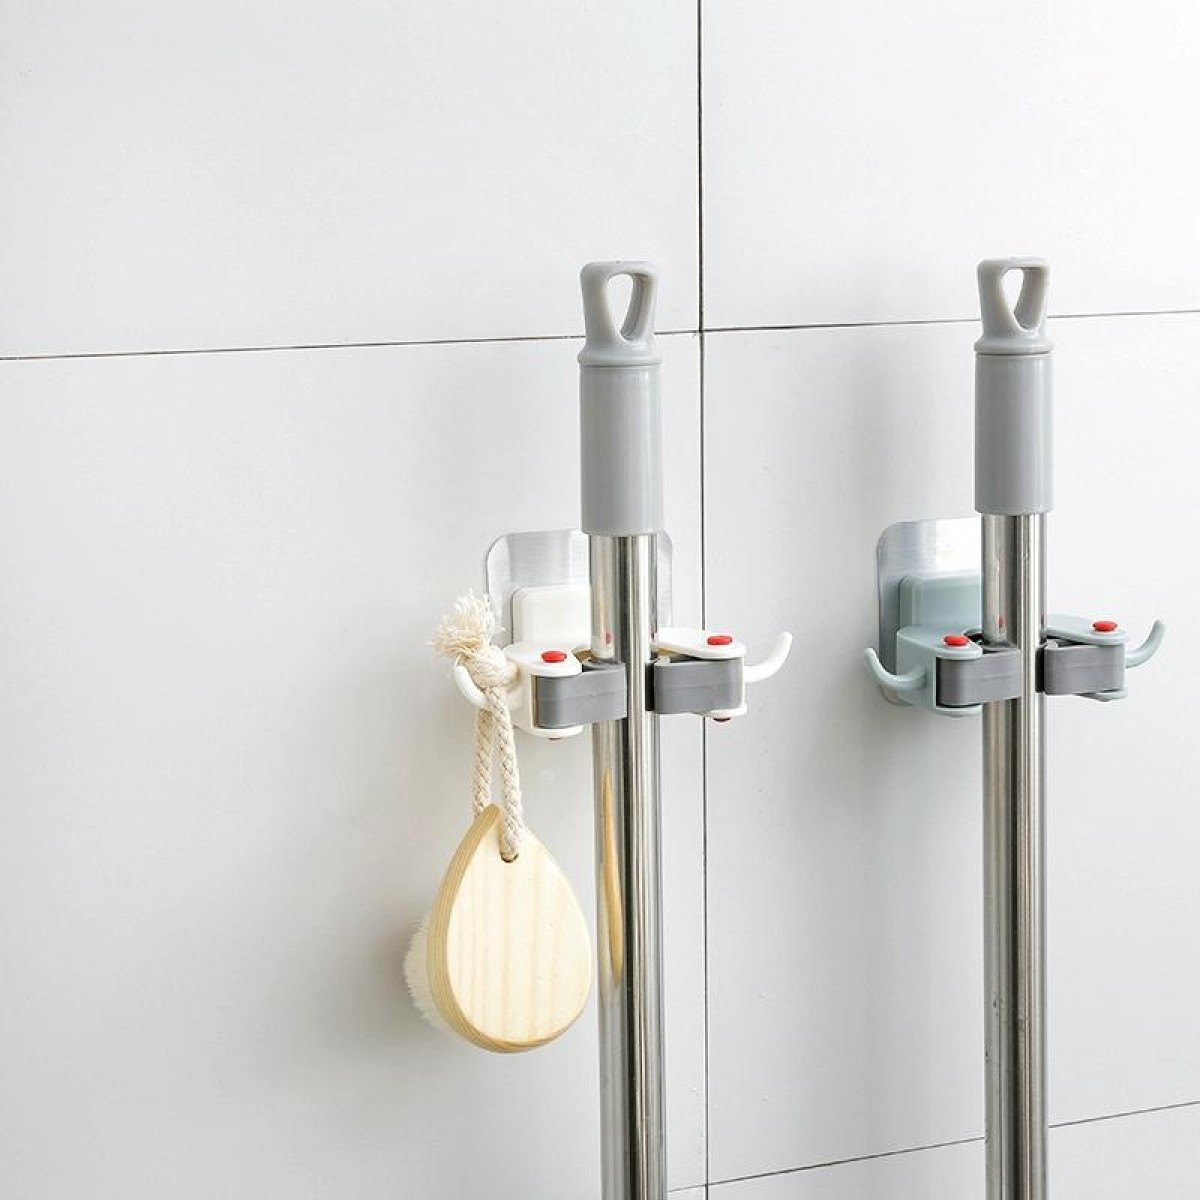 Mop Broom Holder Wall Mounted Kitchen Hanging